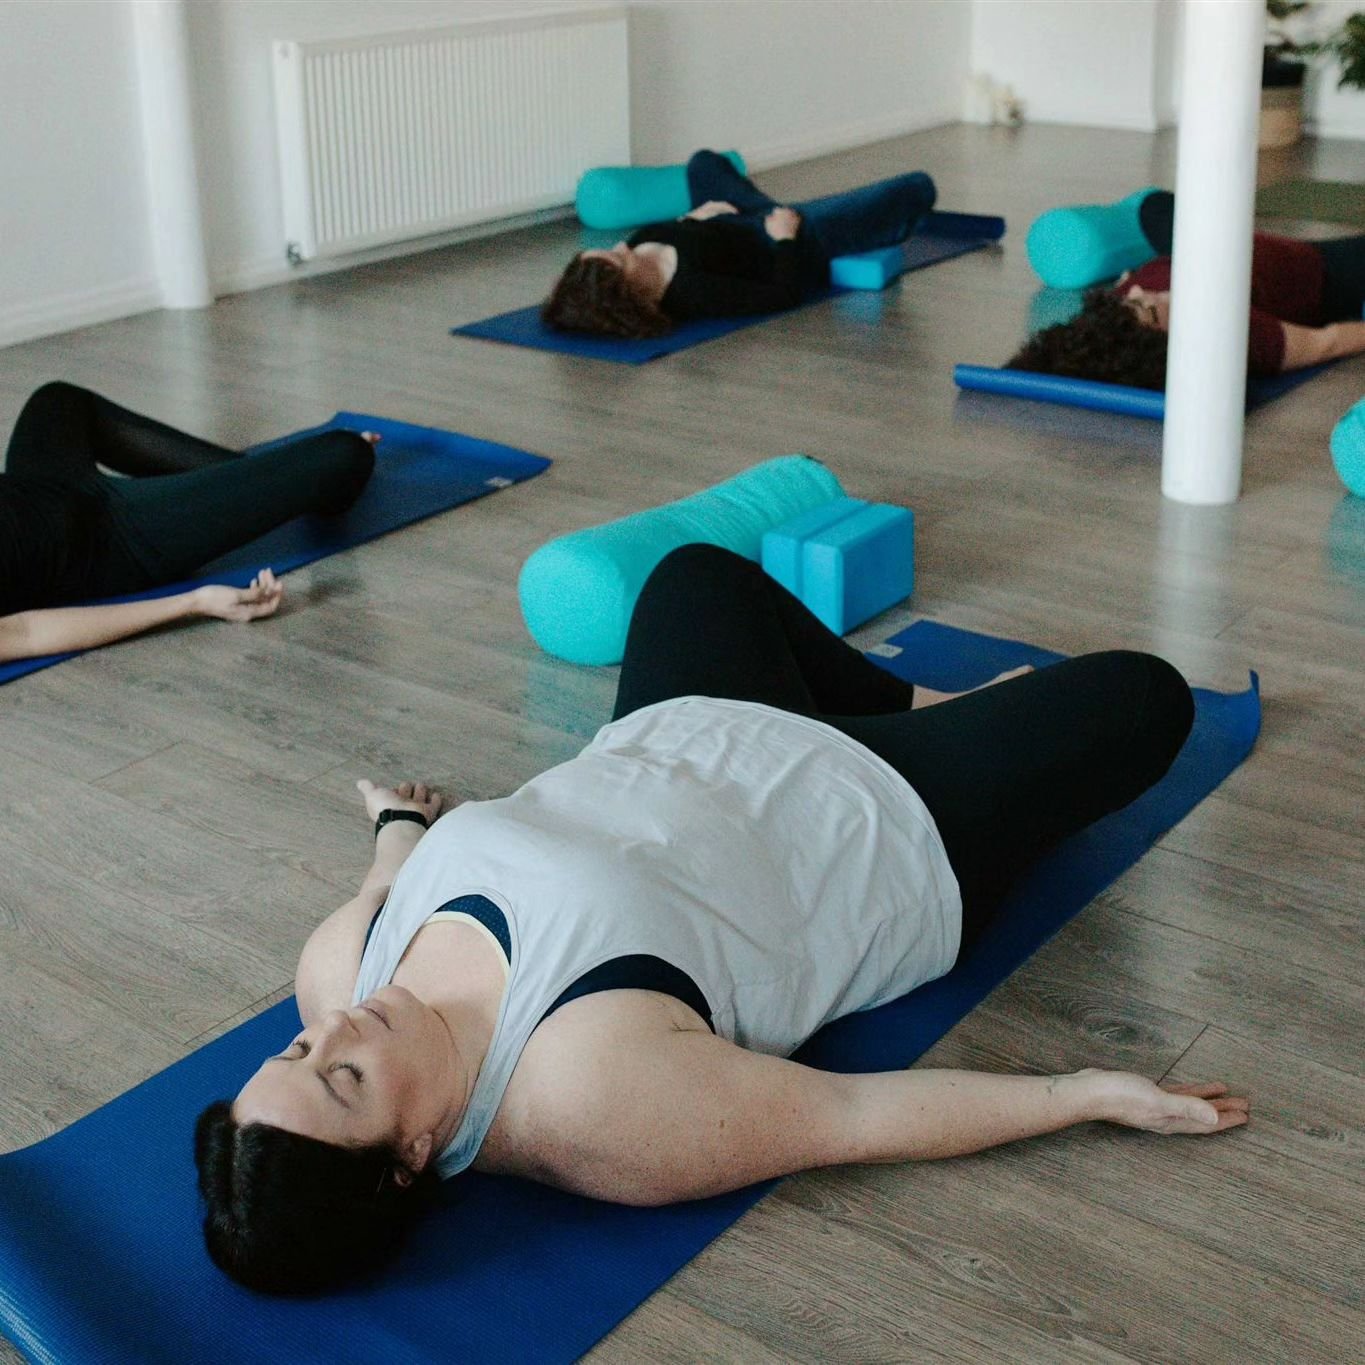 Here are 5 things my Gentle Yoga Class can help you with:

✨️ Regulate your nervous system
✨️ Reduce feelings of stress and anxiety
✨️ Gently strengthen your body
✨️ Improve mobility
✨️Increase flexibility

The good news is they're also beginner frie